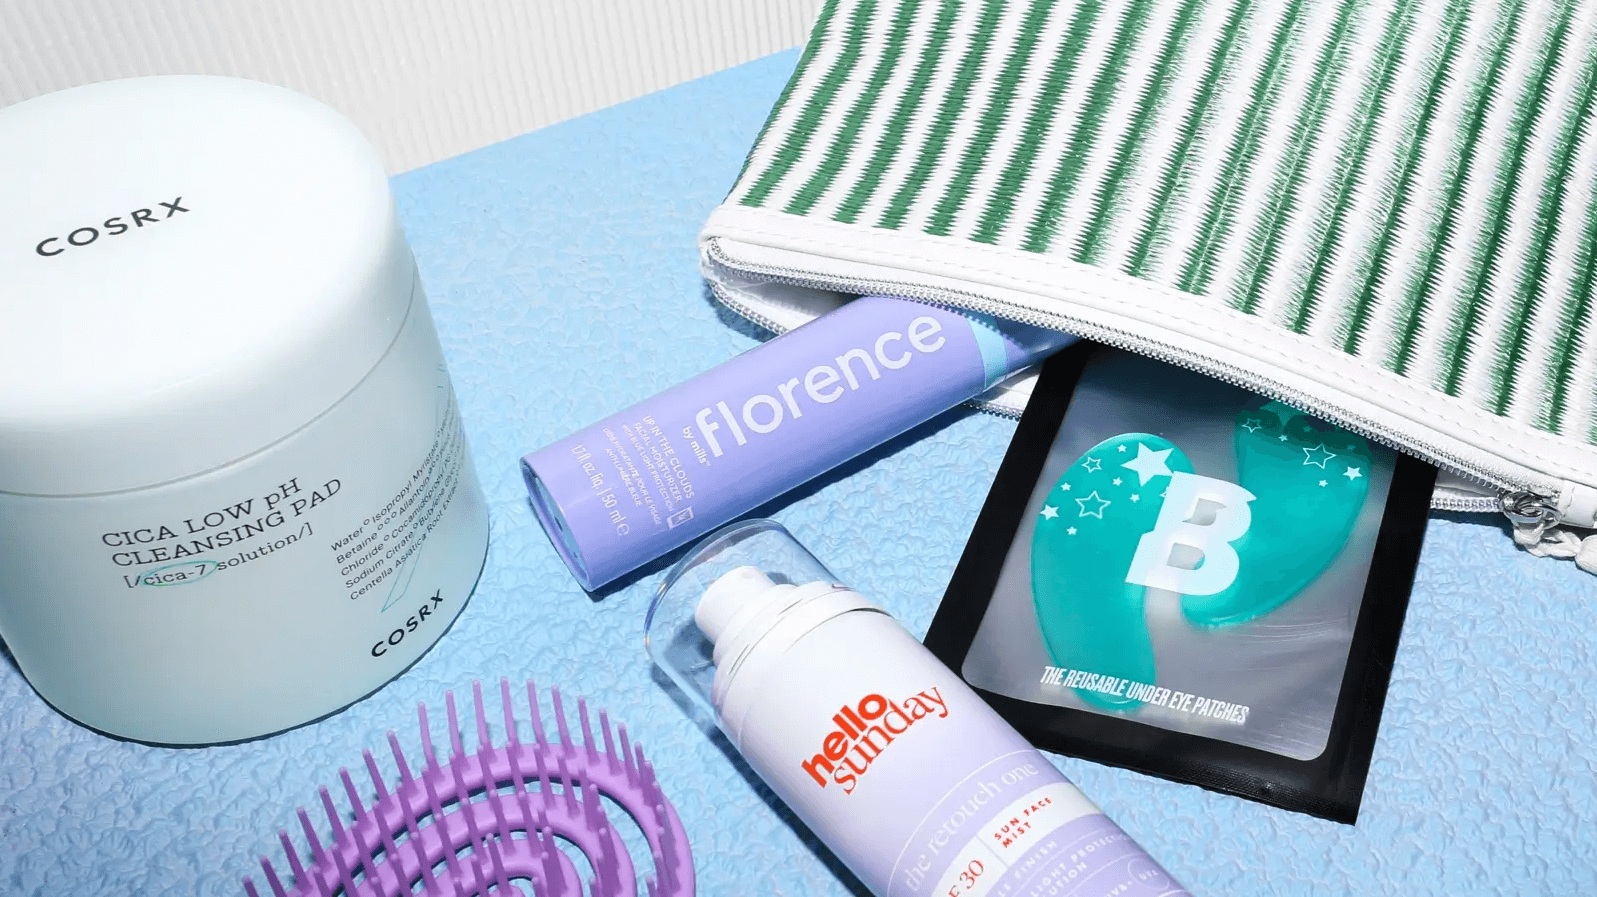 These 6 Products Are Your Festival Skincare Essentials - Beauty